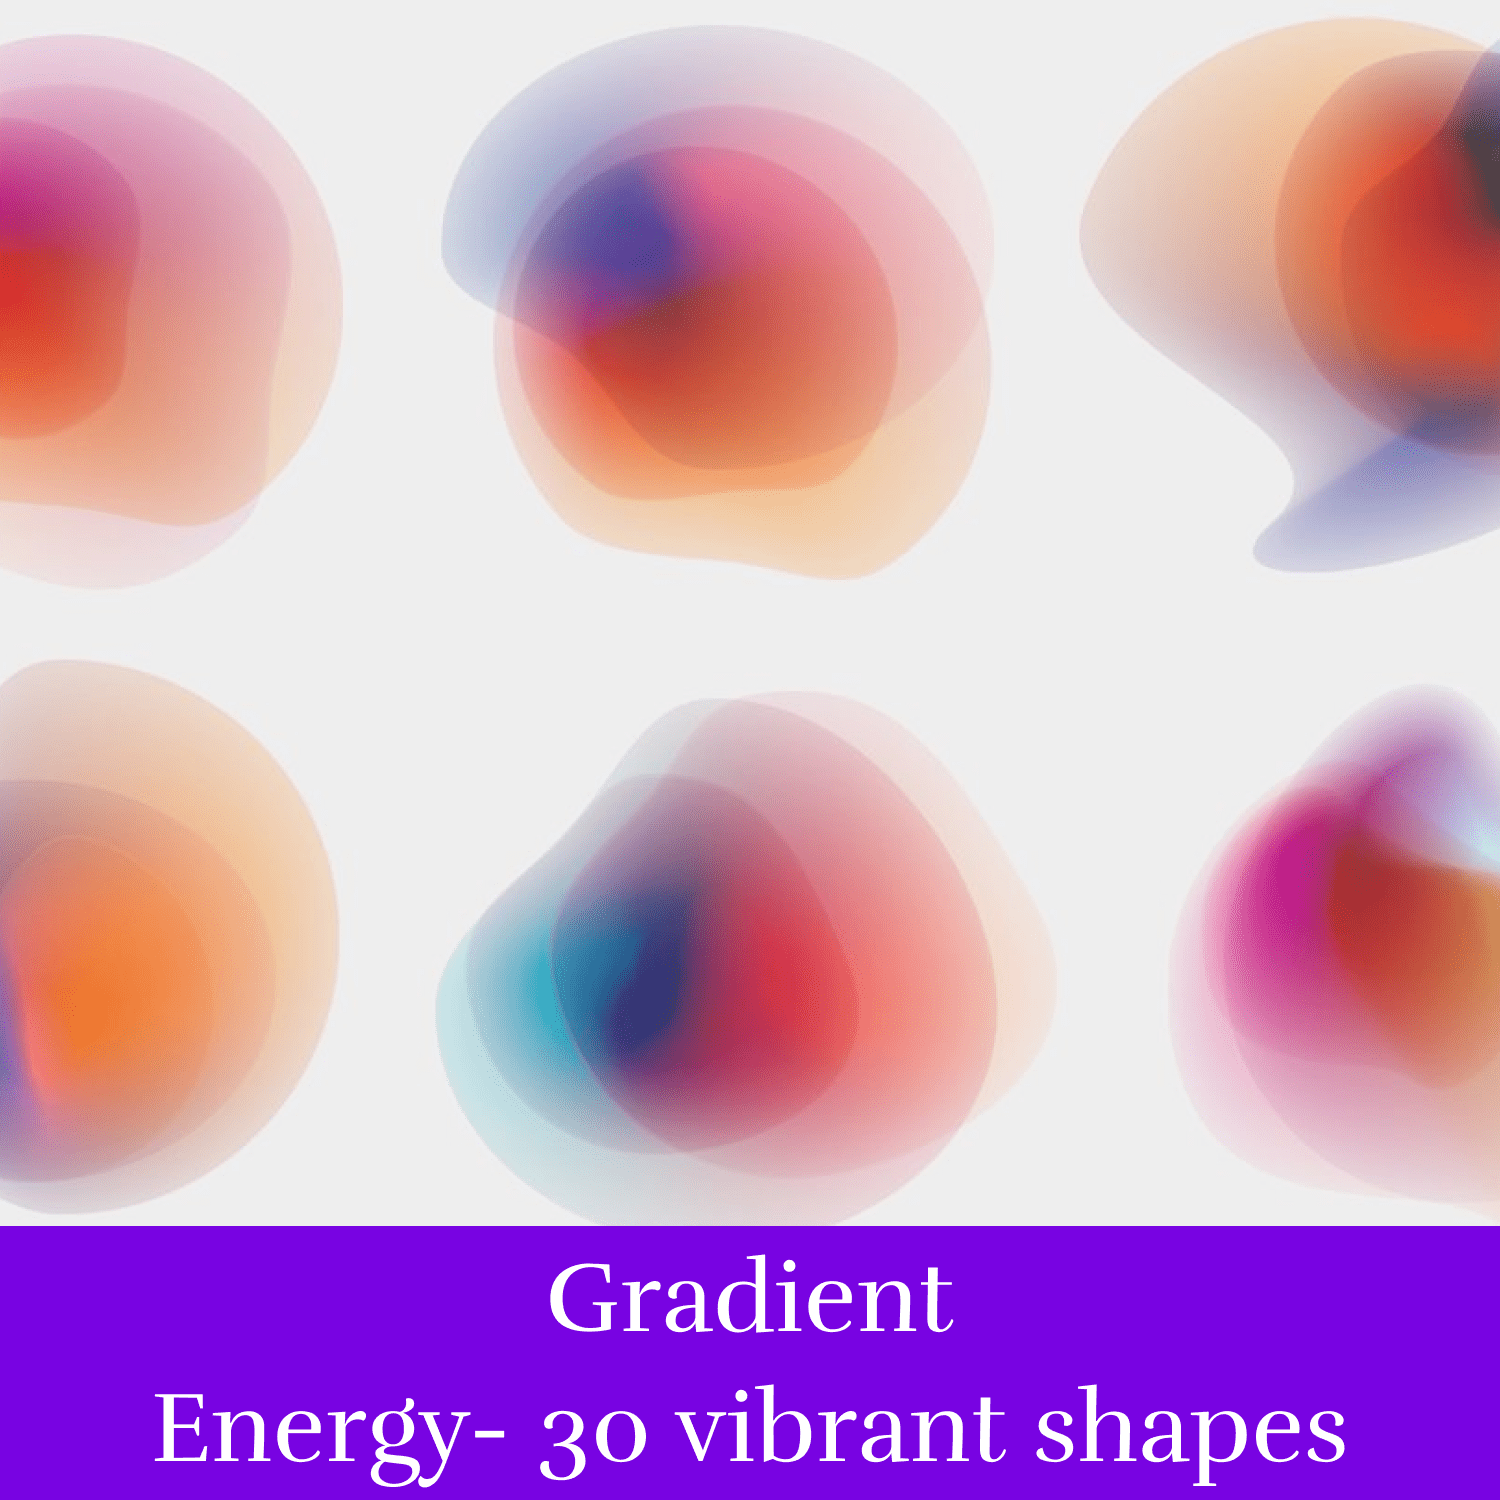 Gradient Energy- 30 Vibrant Shapes cover.